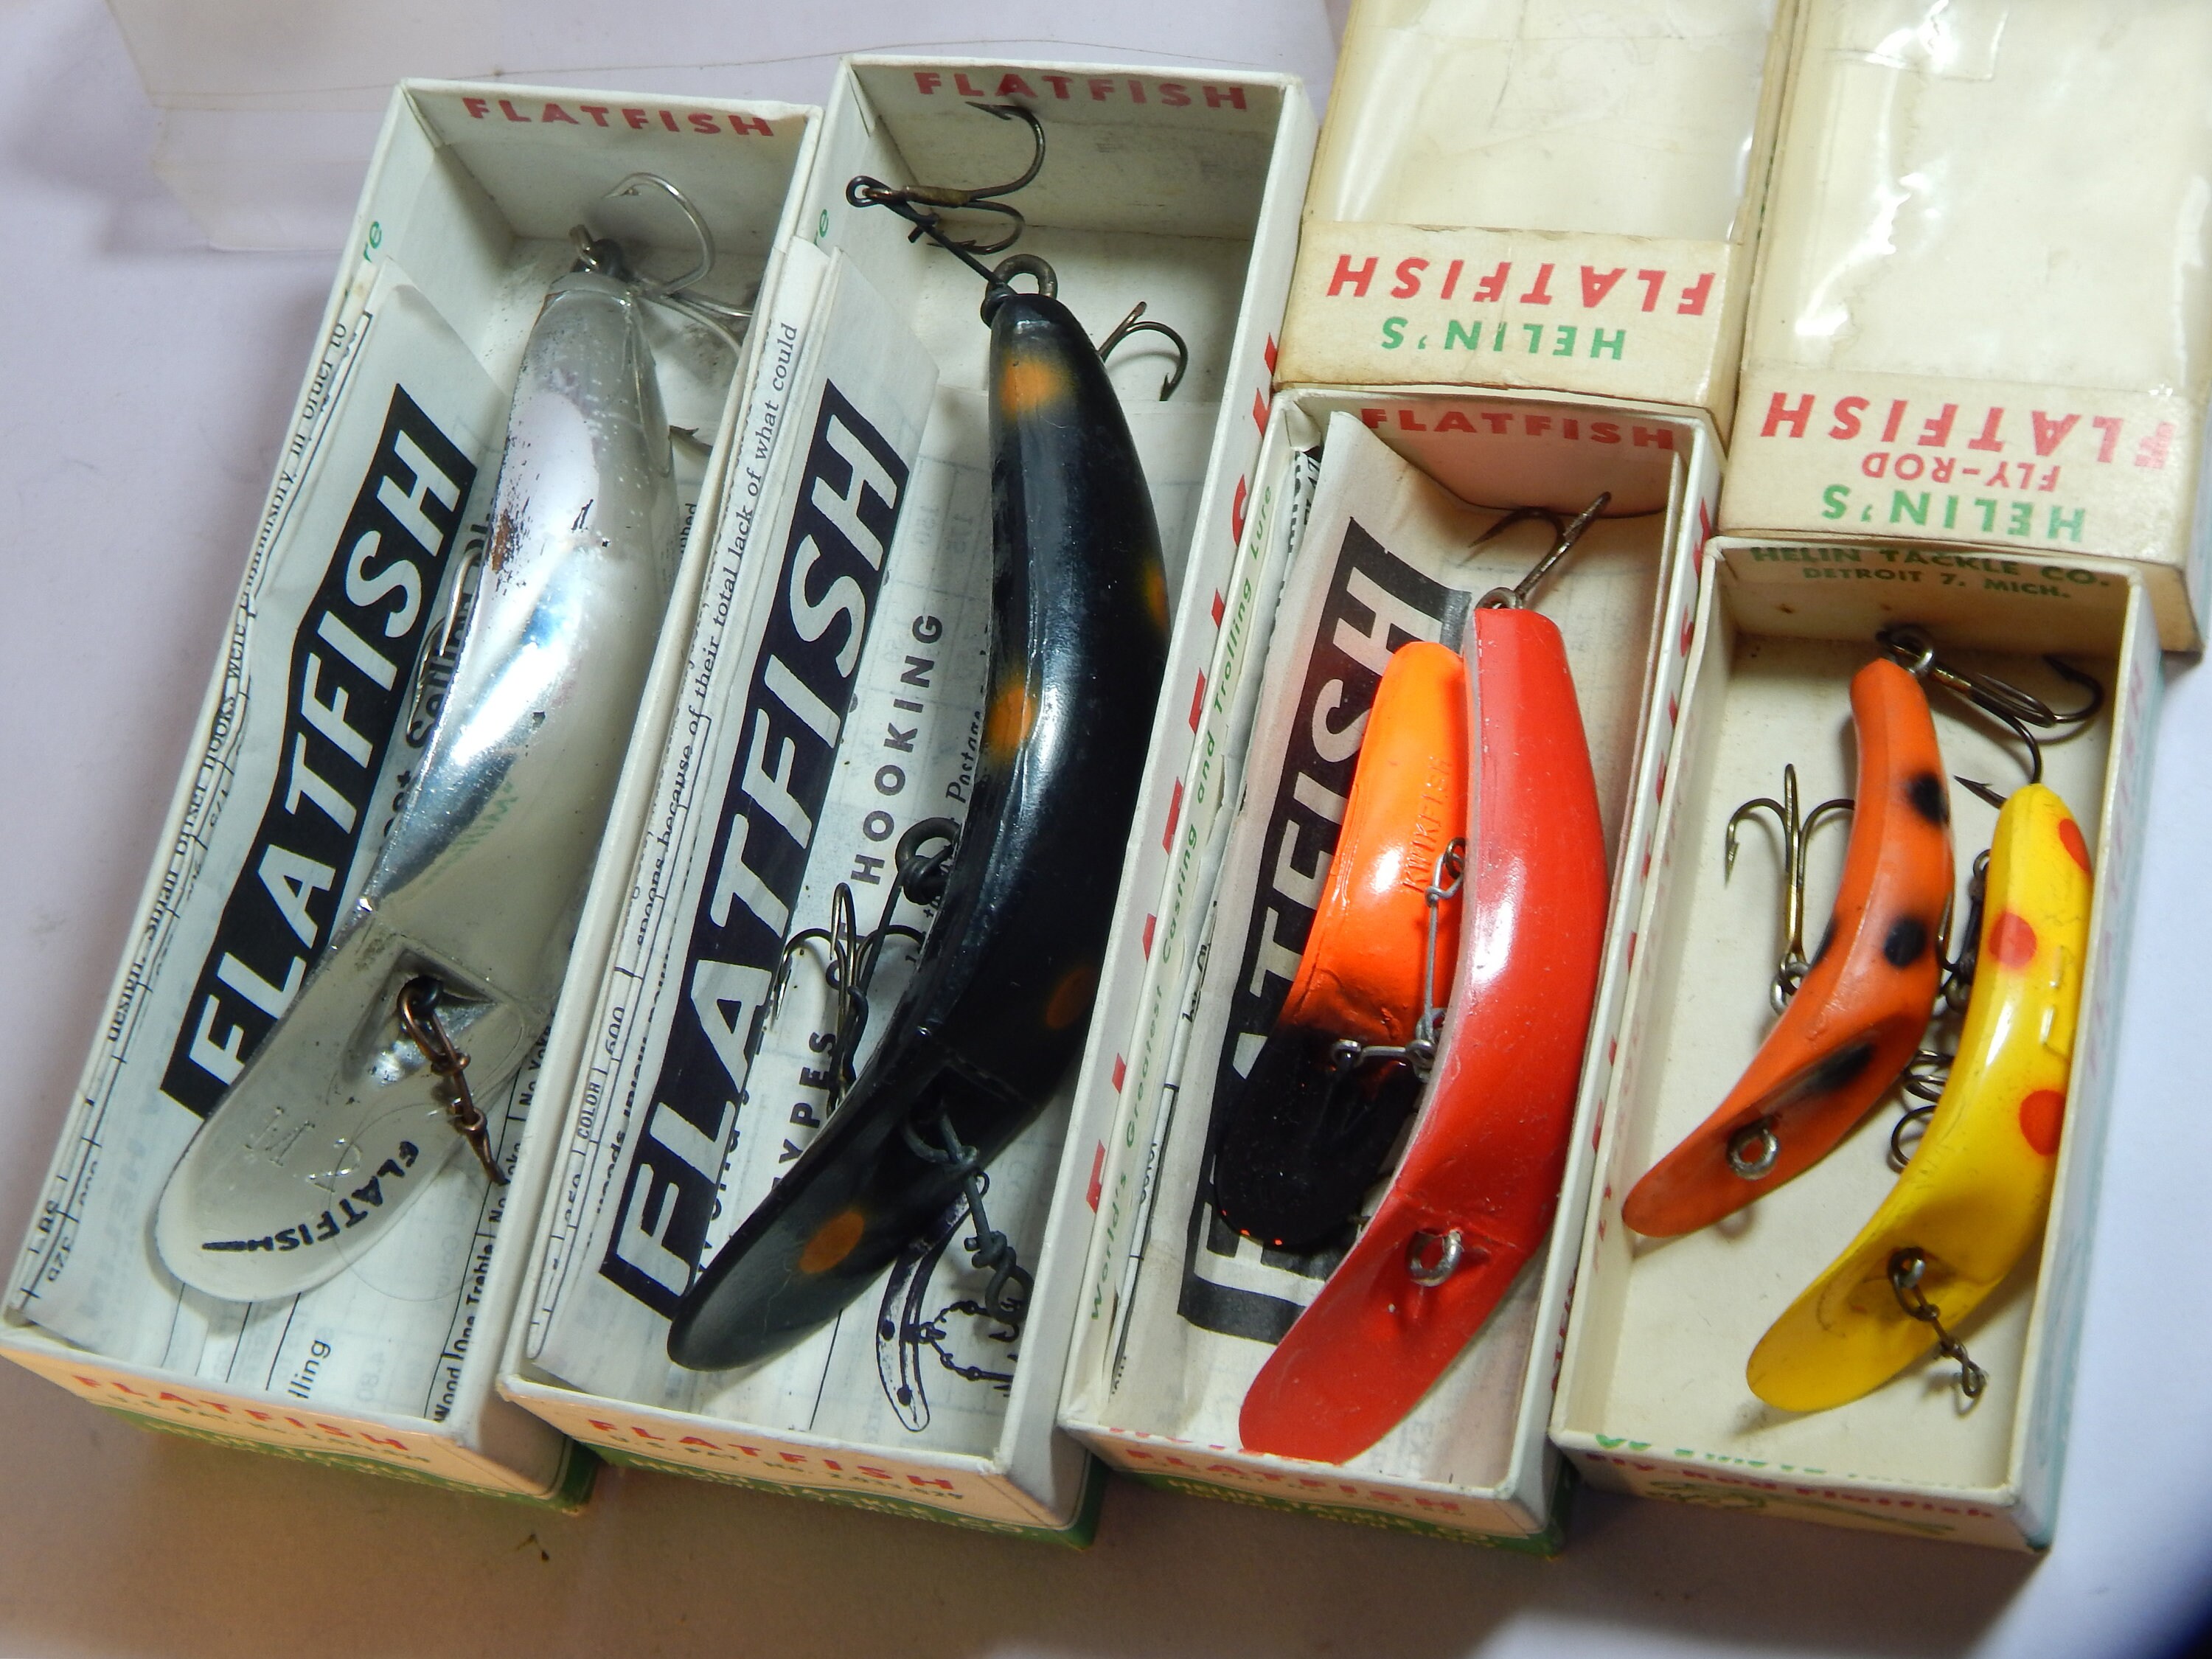 6-lot USA Vintage Helin's Flatfishm2/l9 & Other Swimmer Plugs Fishing Lures-used  